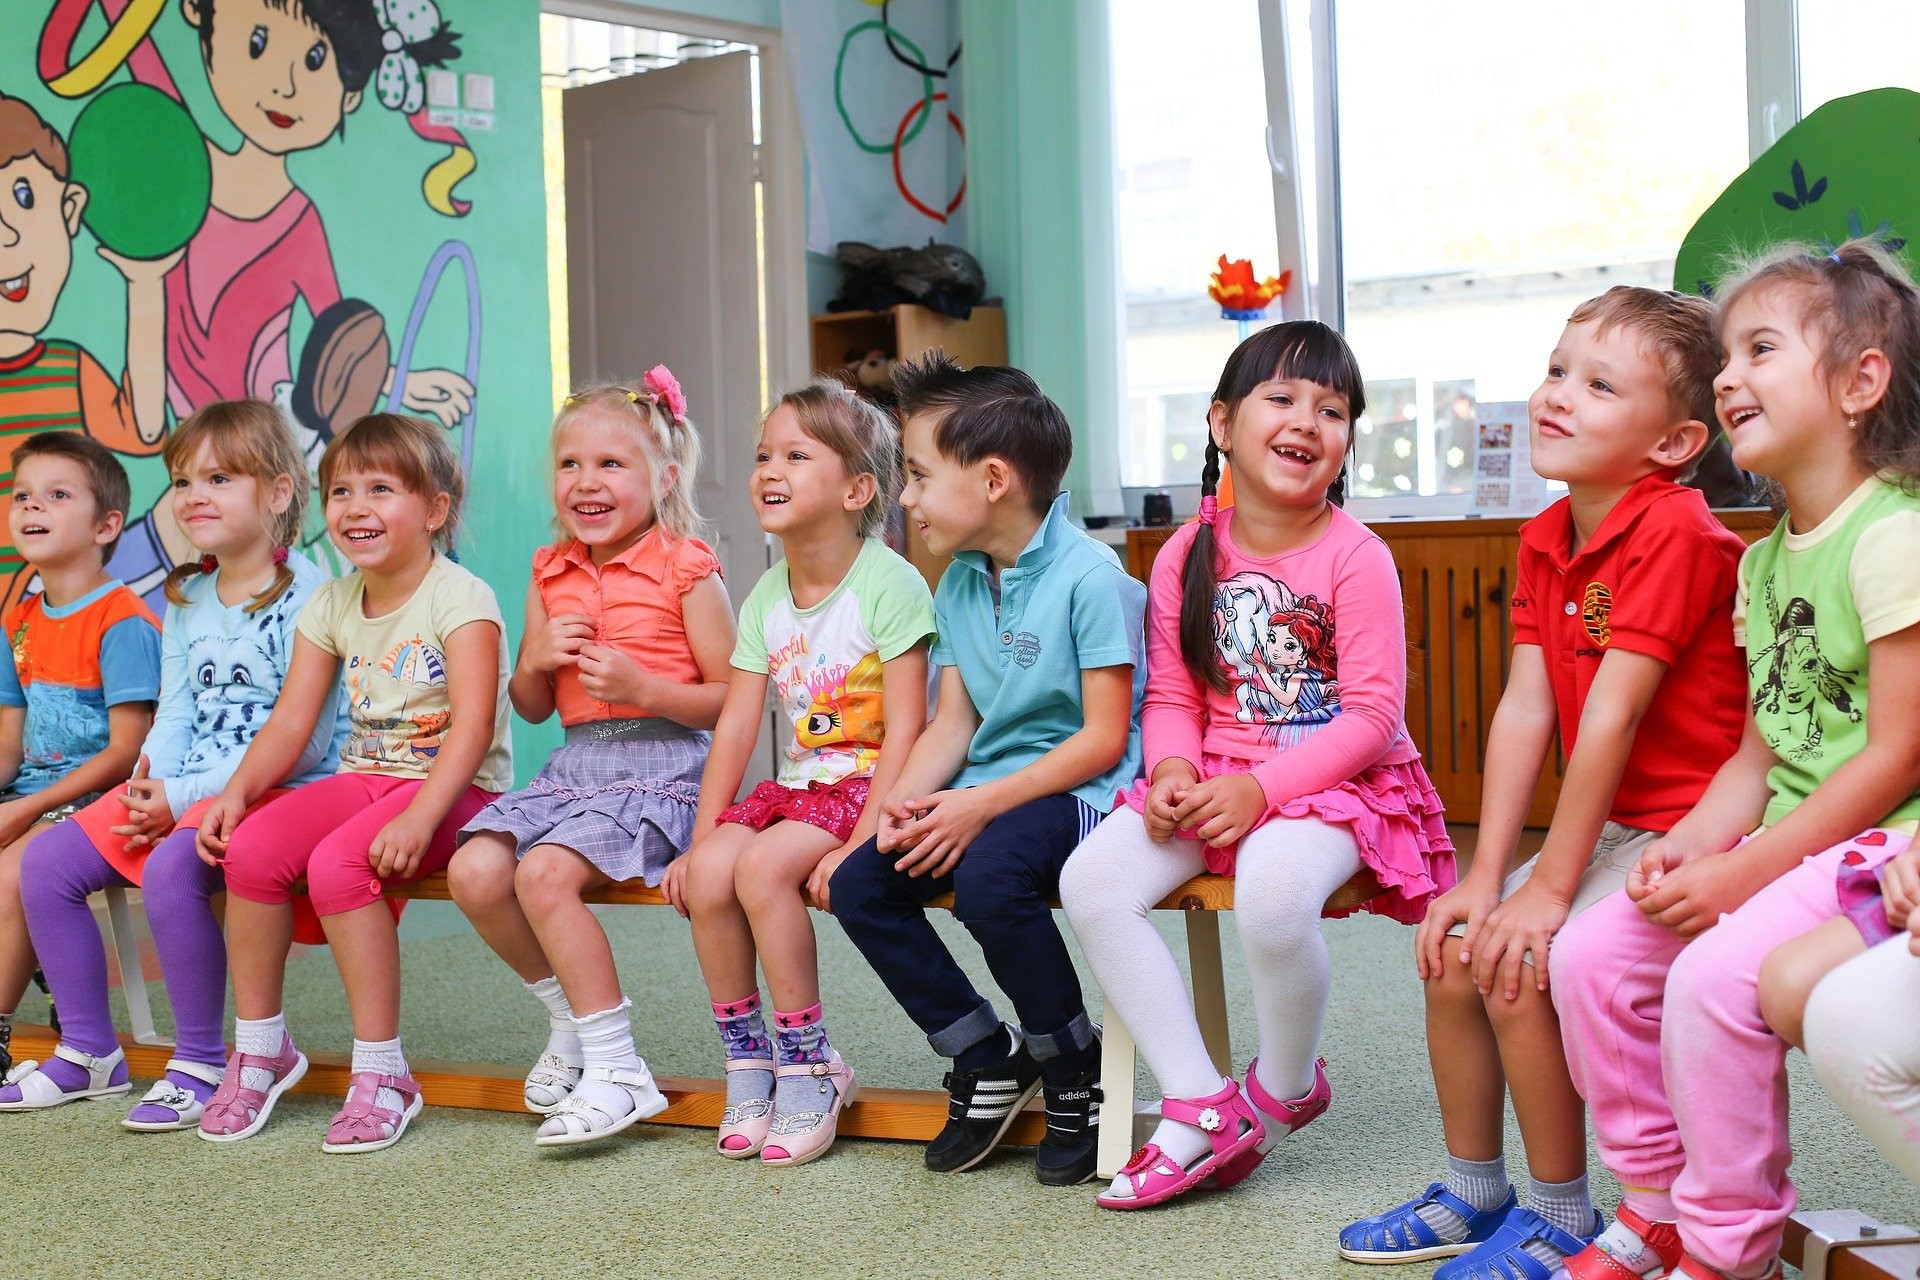 Nine kindergarten students sit in a row on wooden benches in a classroom.